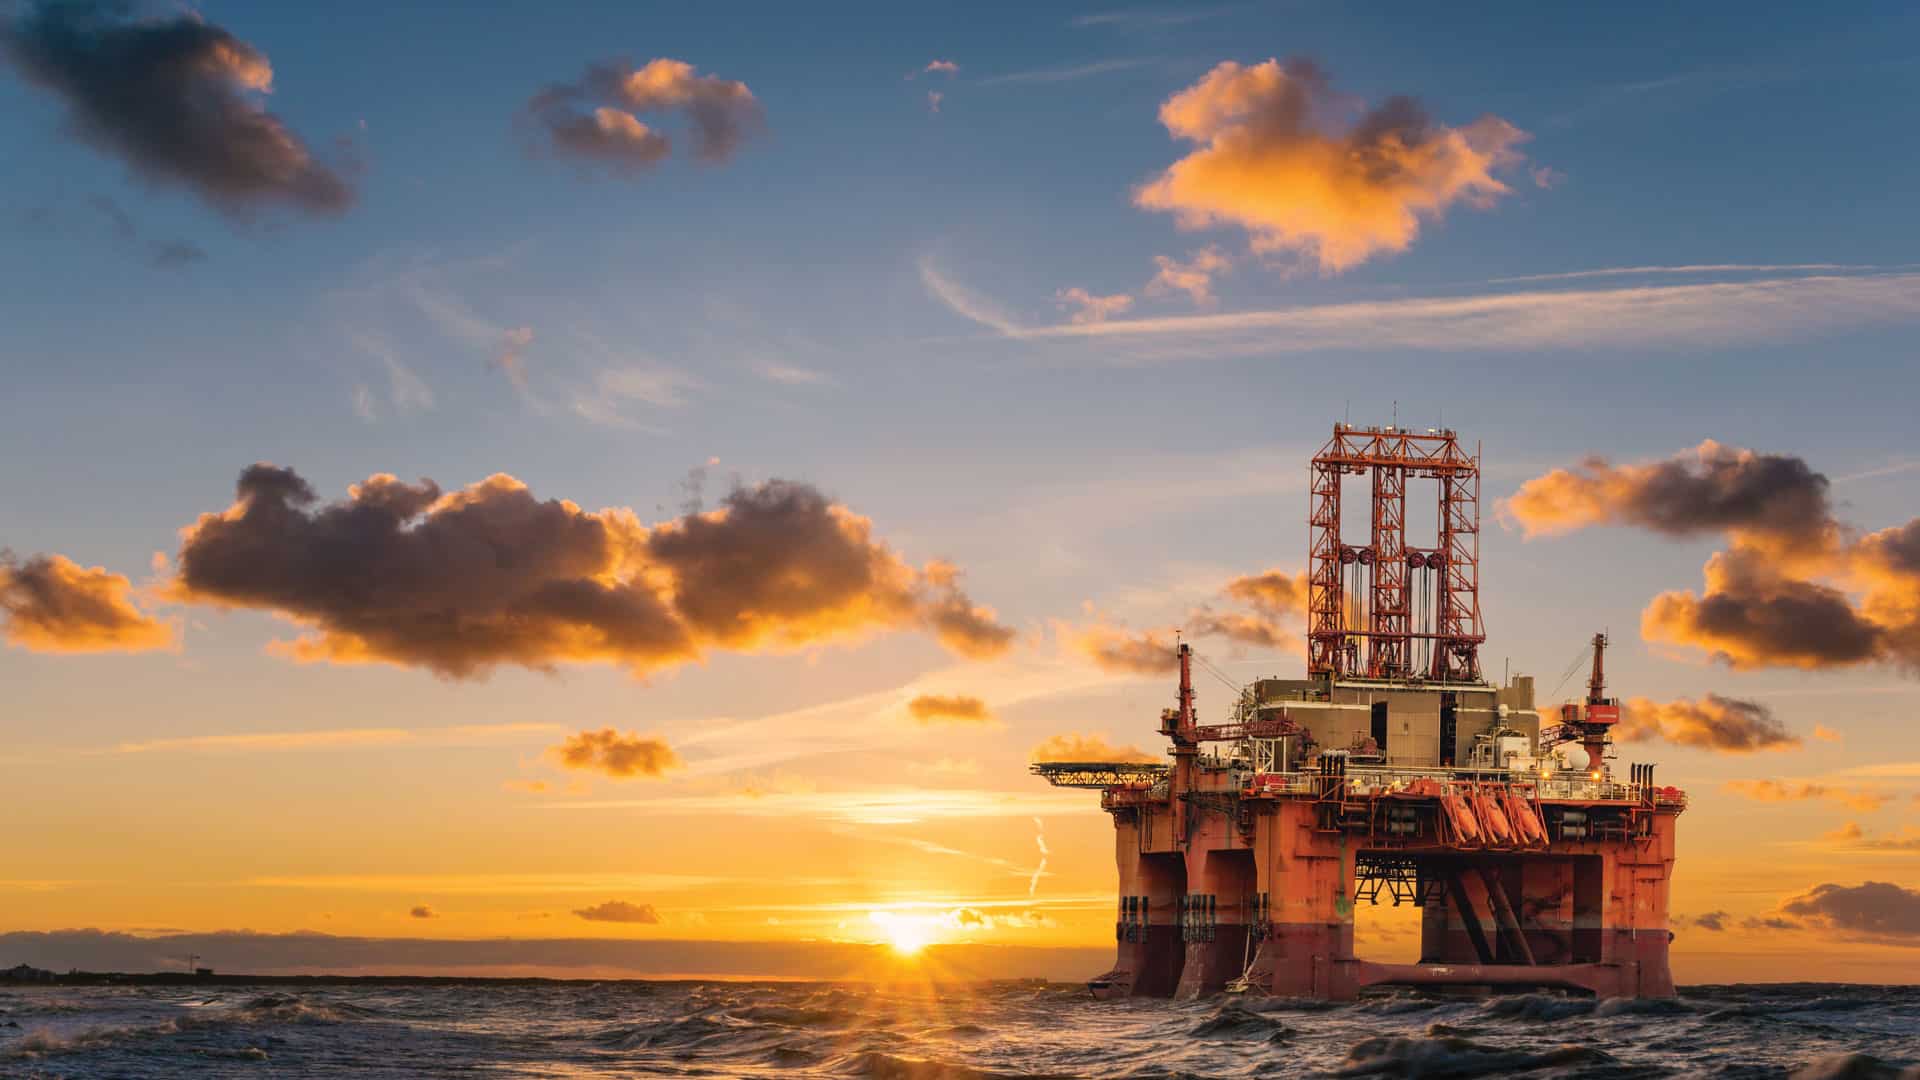 Oil well in middle of ocean at sunset